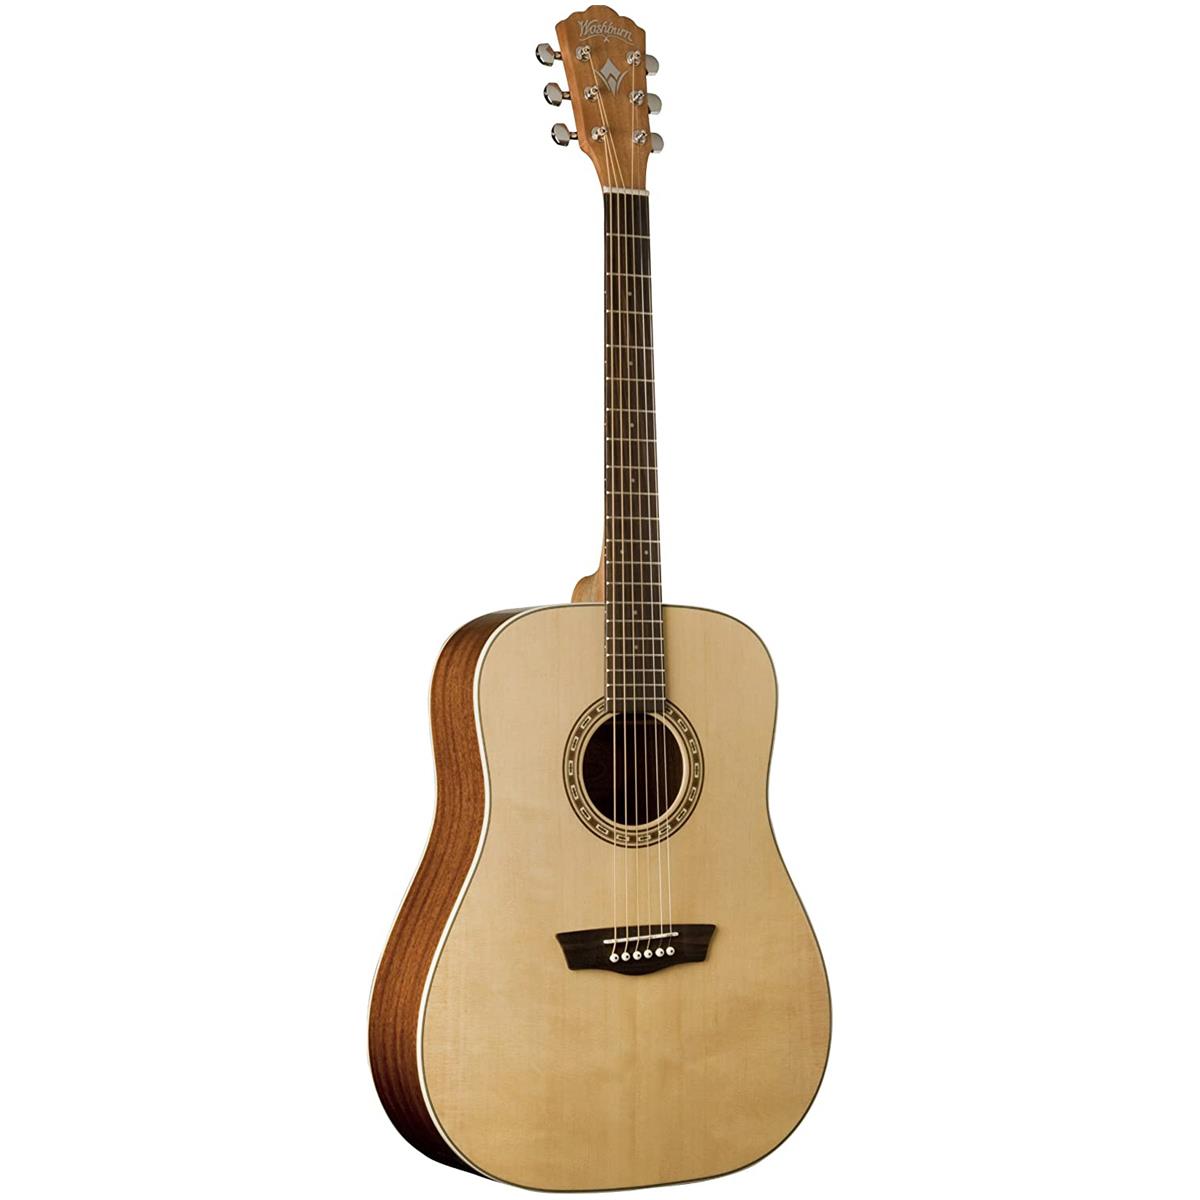 Image of Washburn Harvest Series D7S Dreadnought Acoustic Guitar